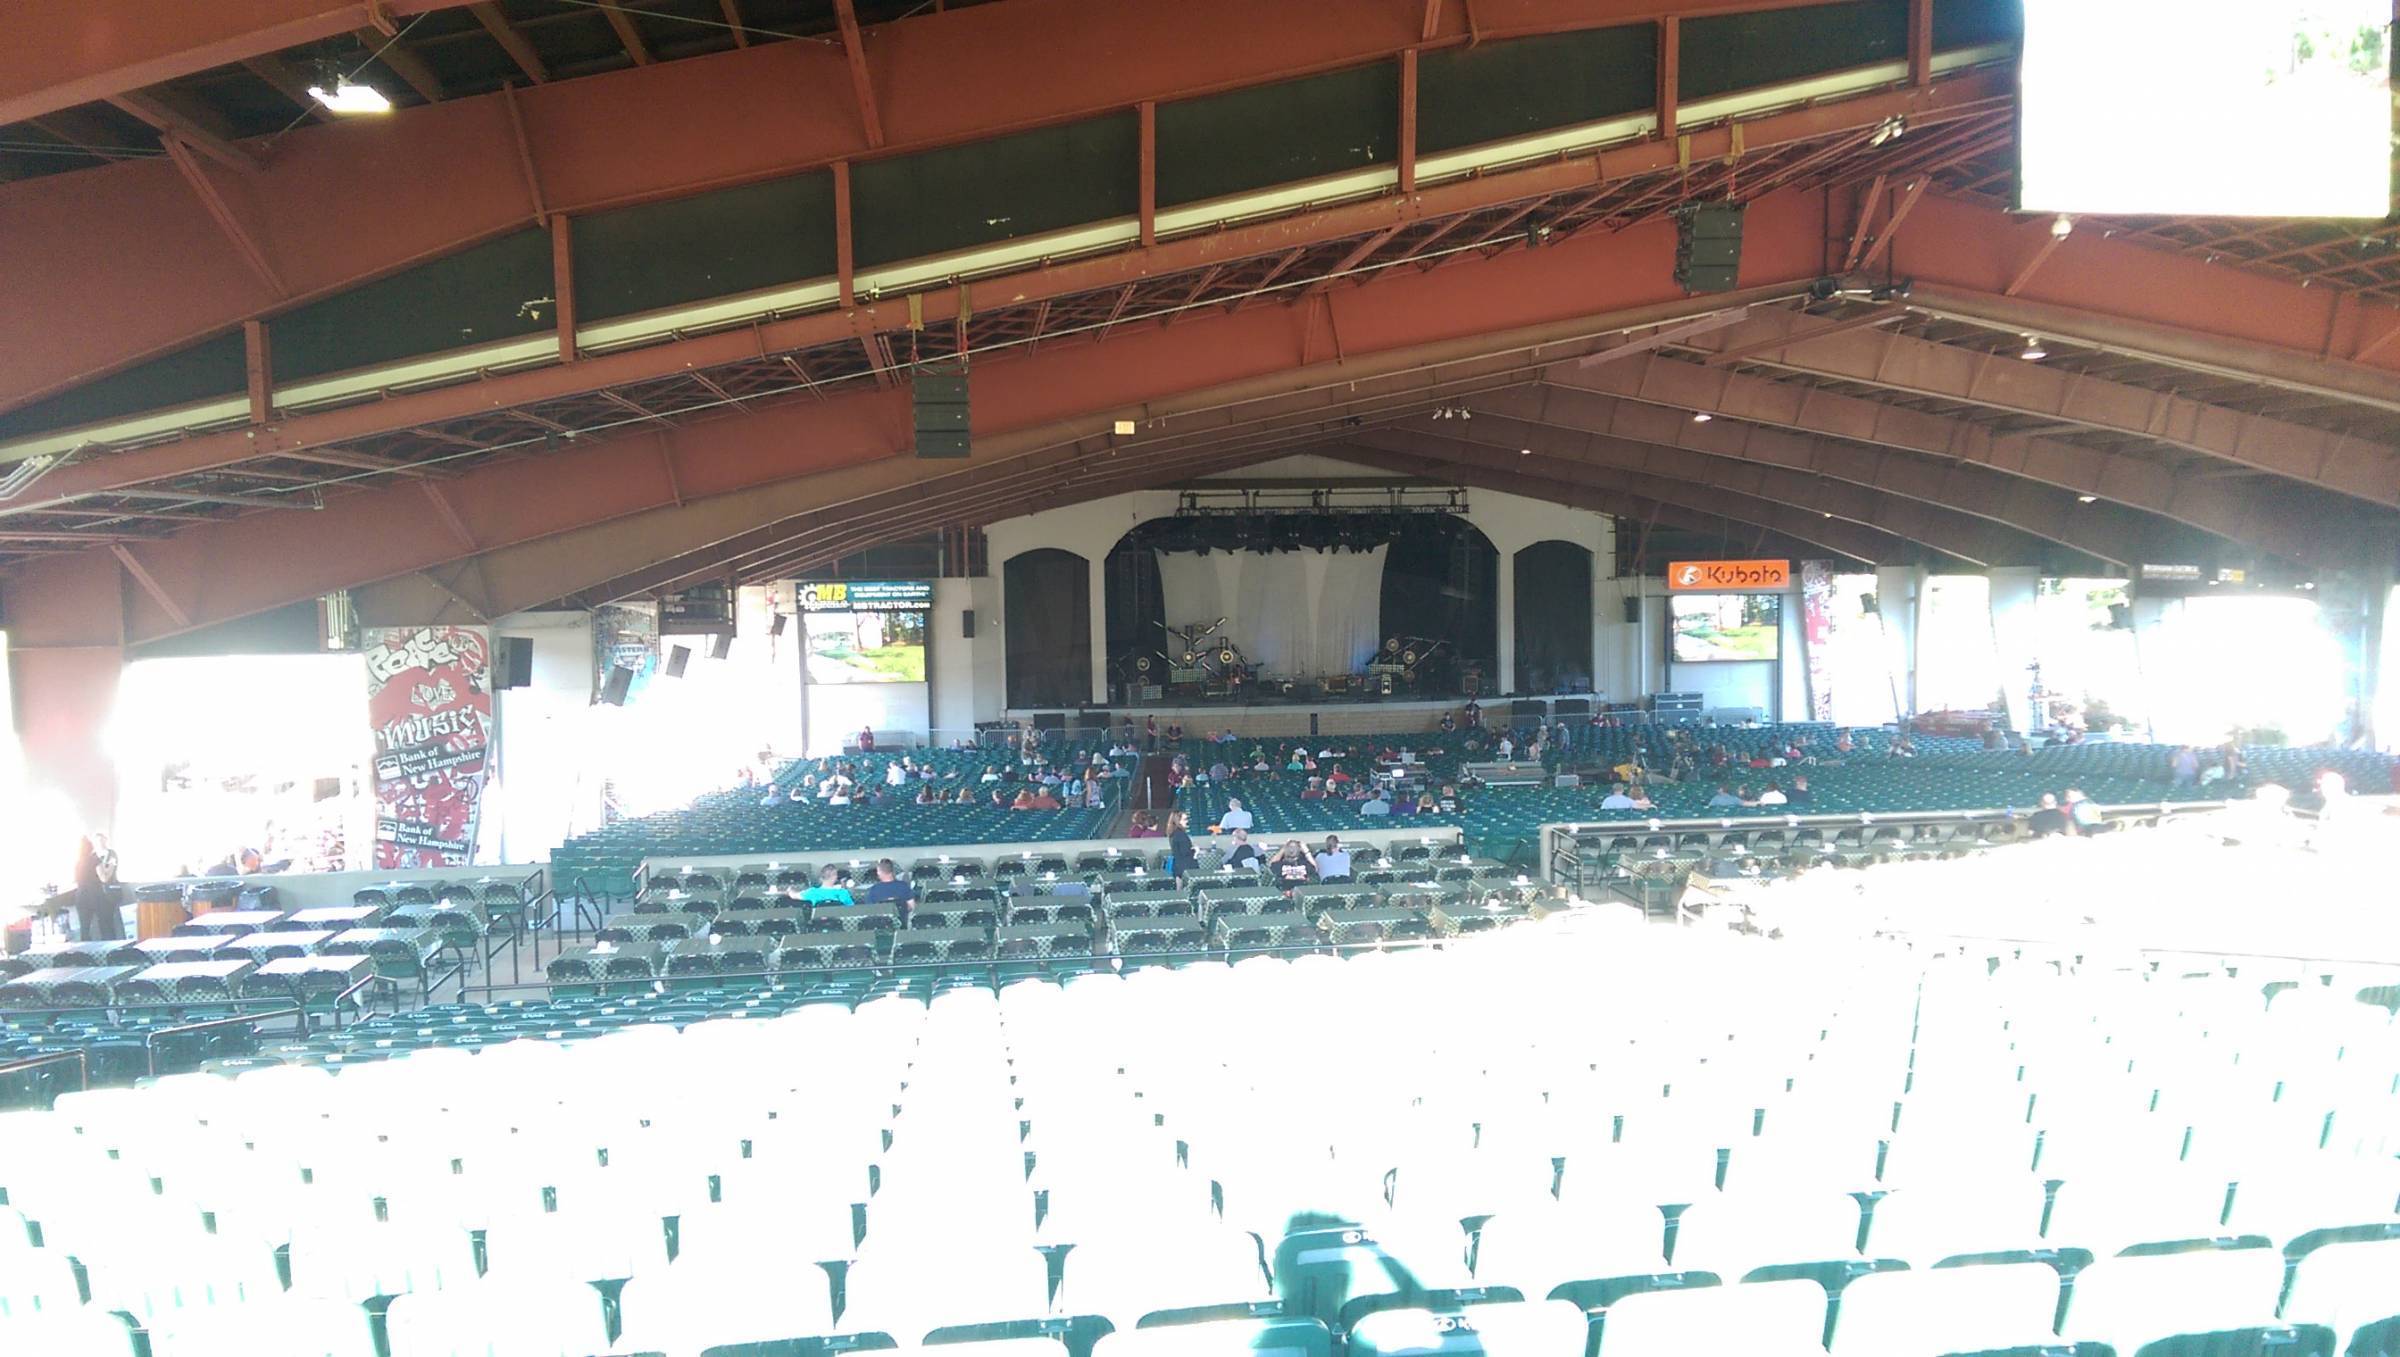 head-on concert view at Bank of New Hampshire Pavilion